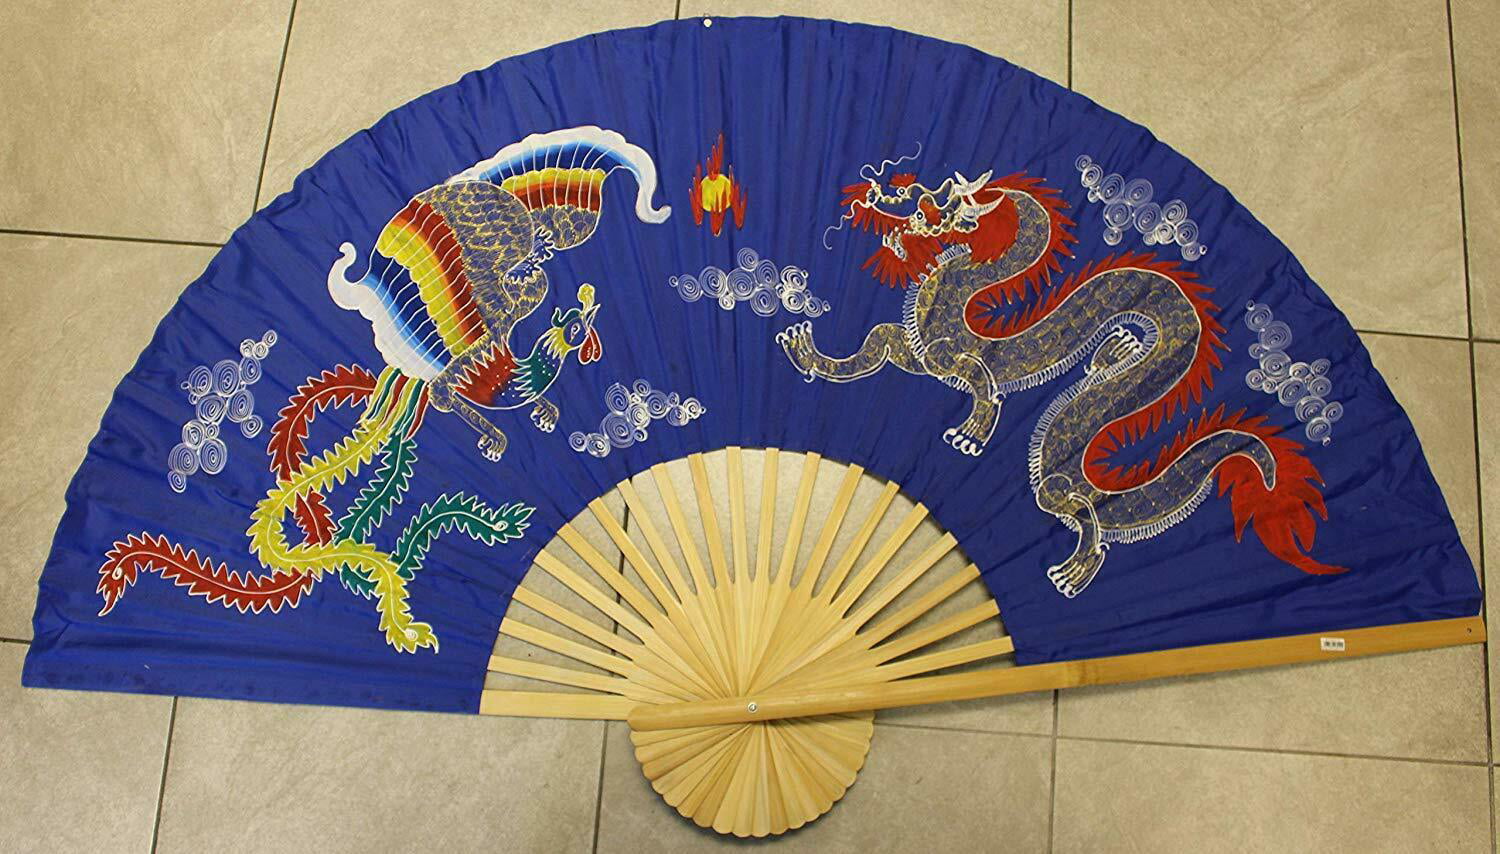 35” wide Handcrafted Bamboo Wall Hanging Decorative Folding Fan Dragon Design 